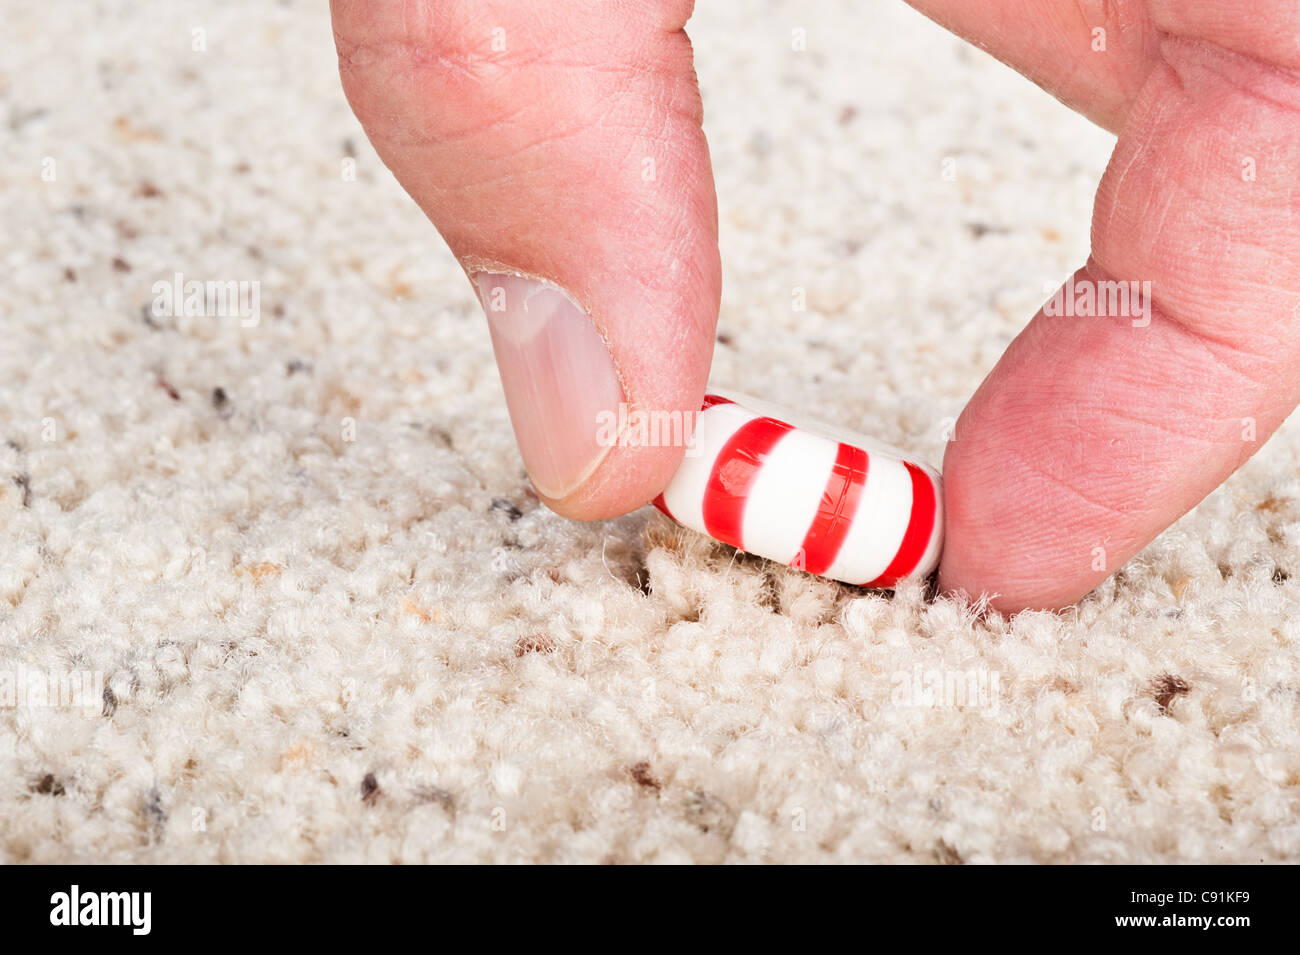 A person pulling a sticky candy mint off the carpet. Stock Photo